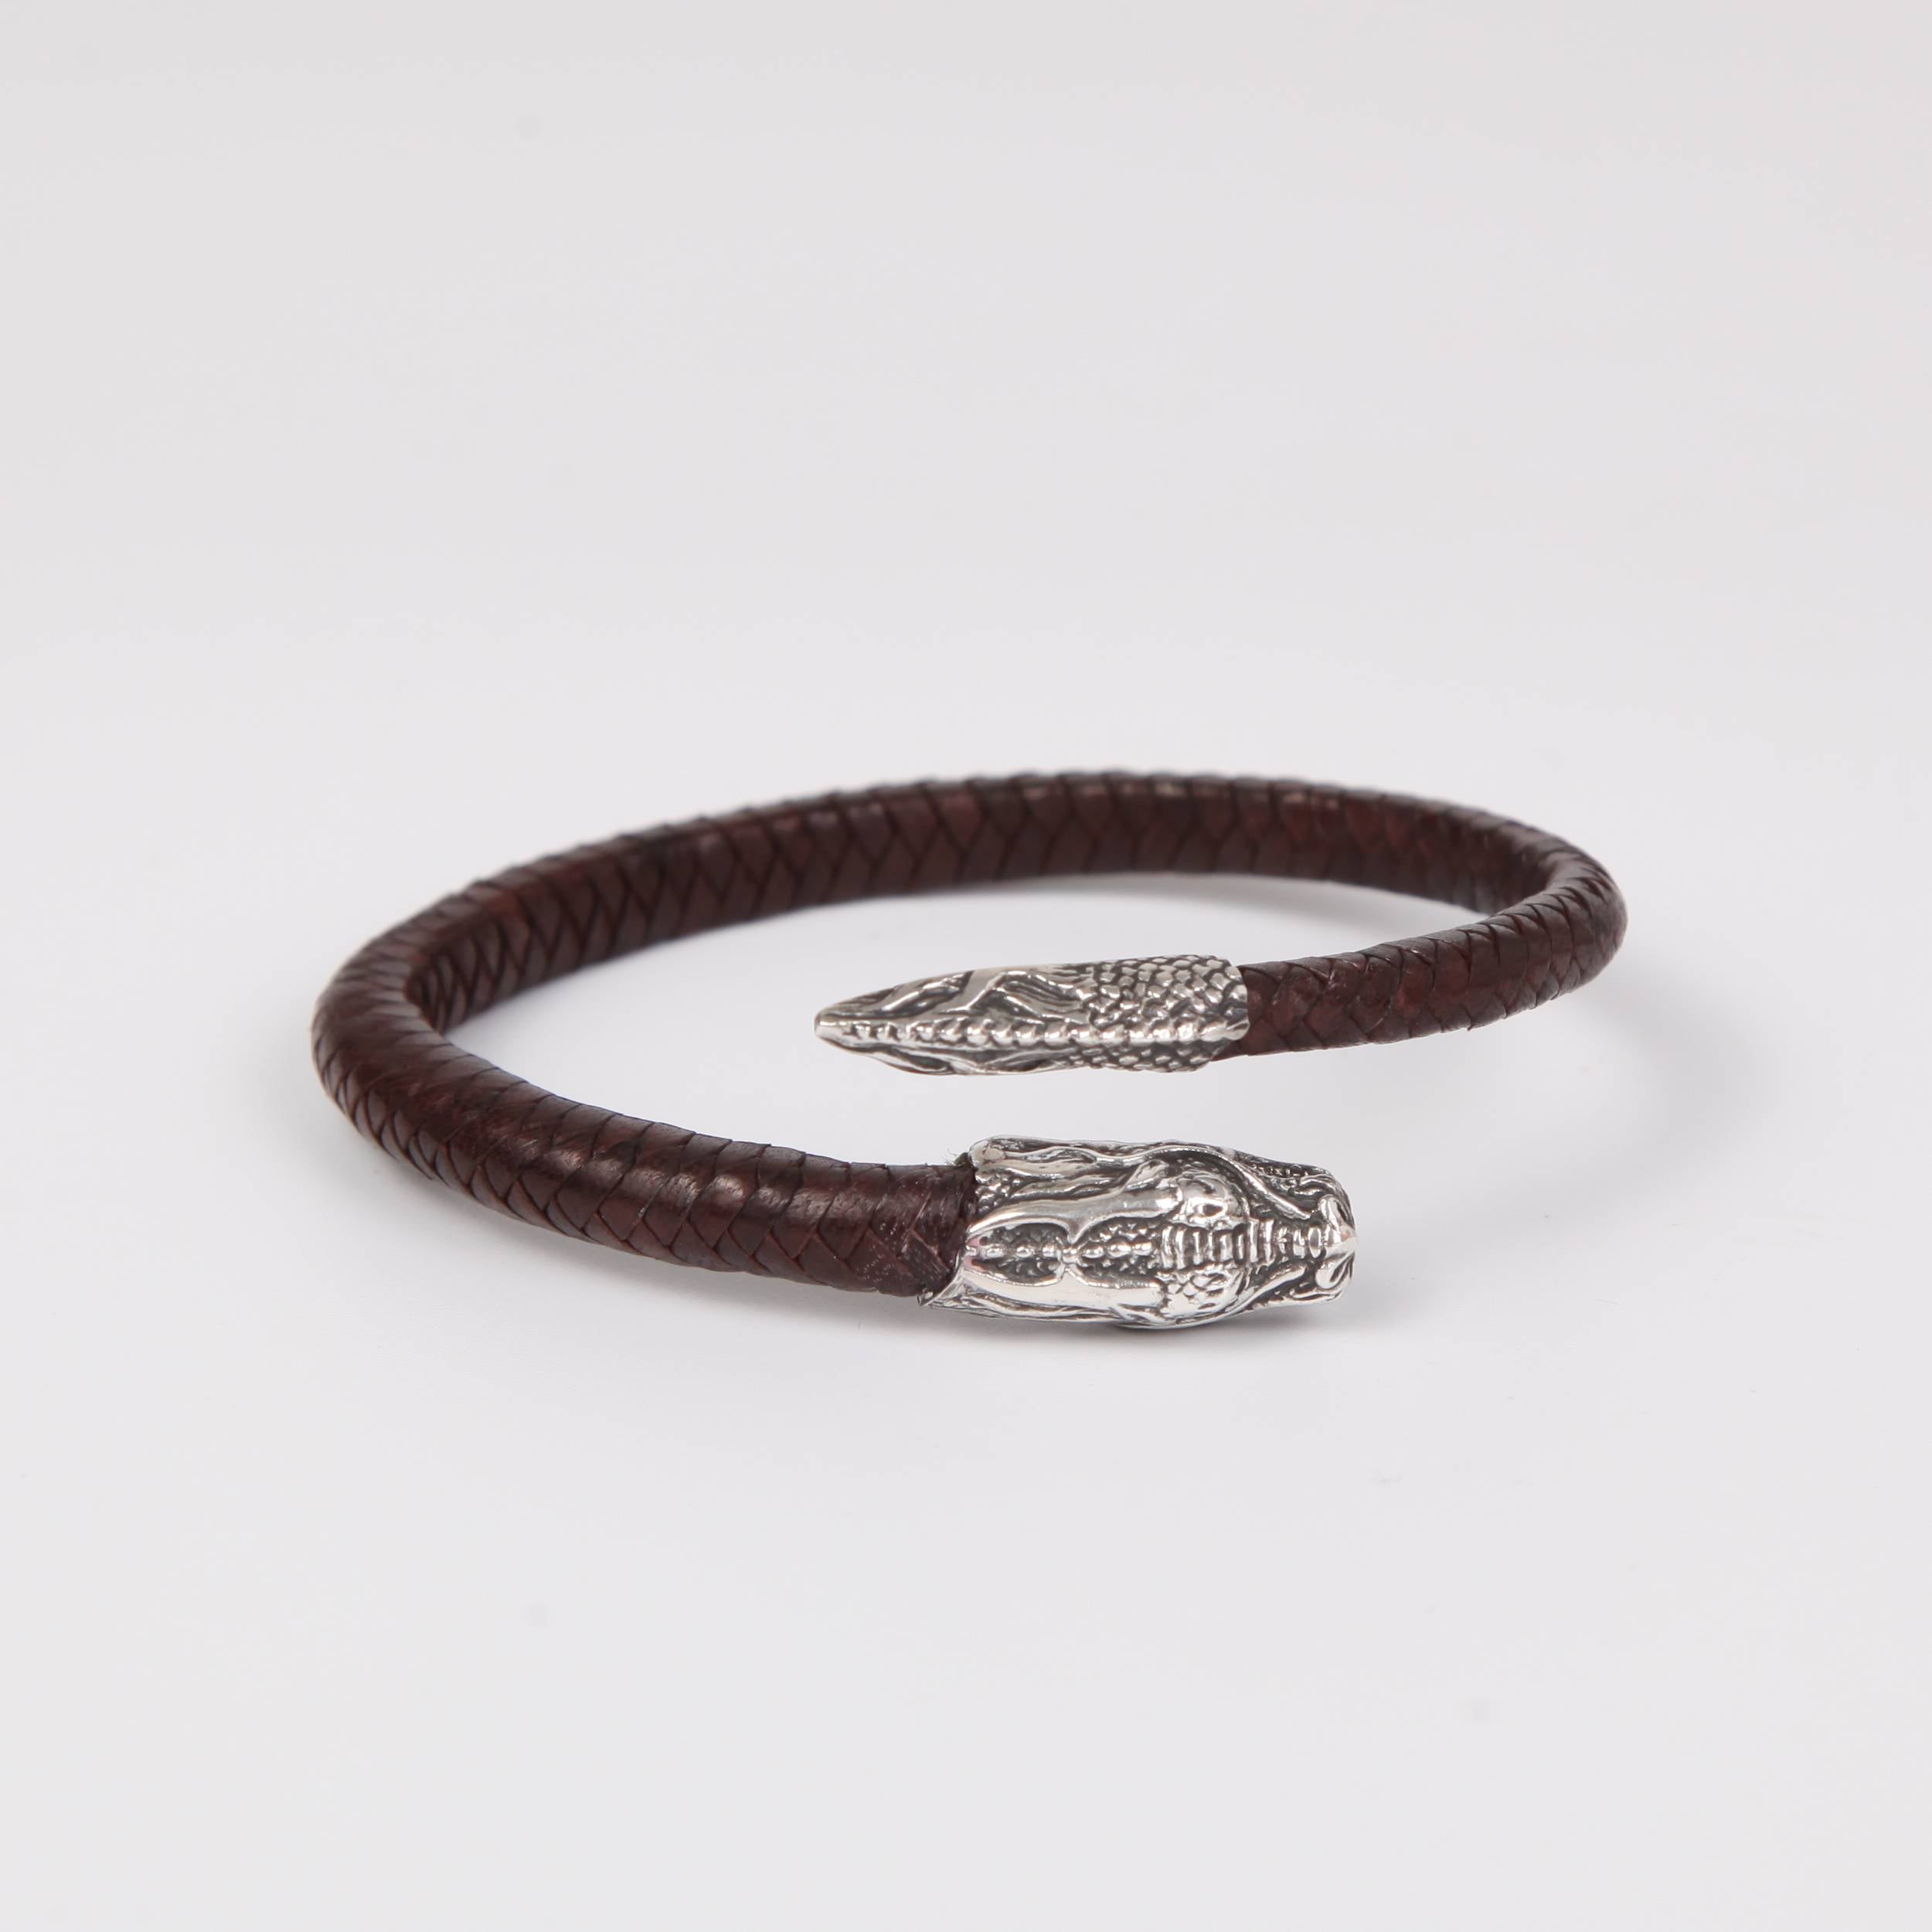 Leather (goat skin) Bracelet with Silver Dragon